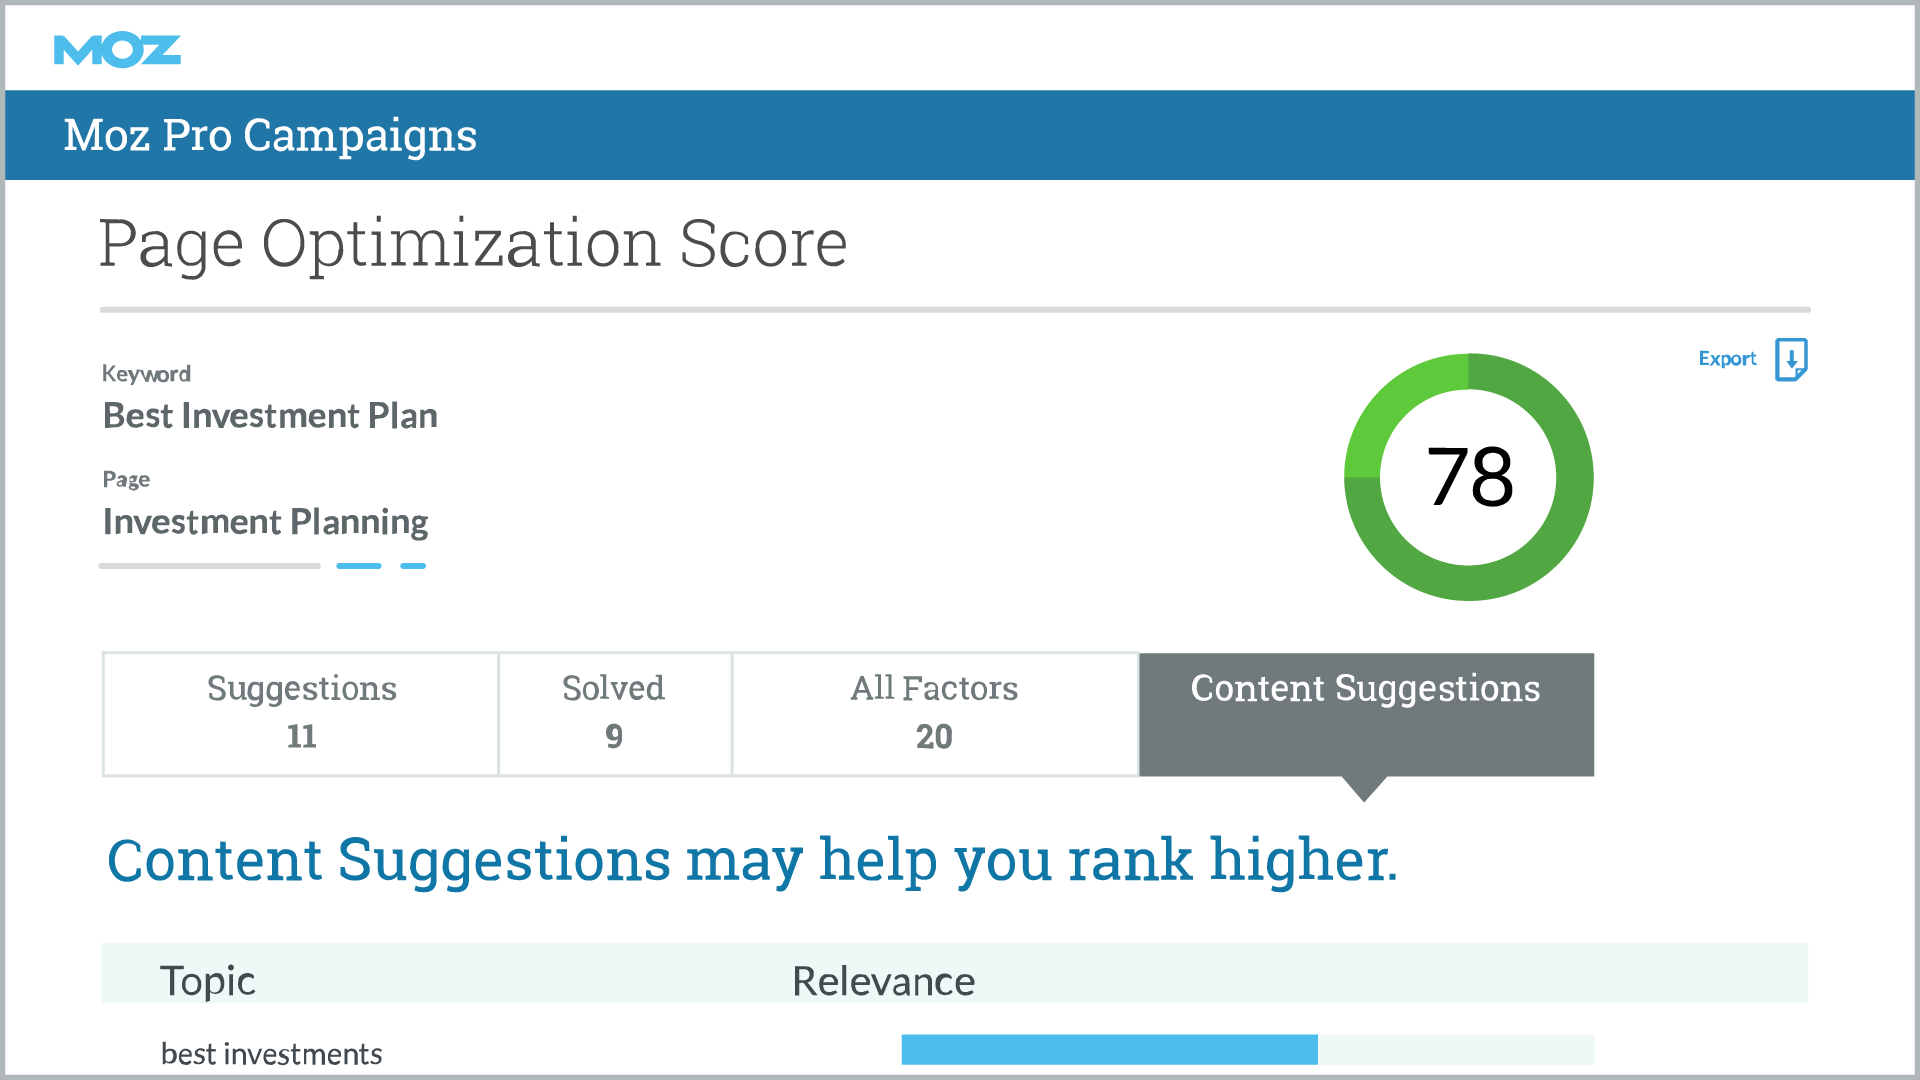 With Page Optimization reports in Moz Pro we'll score your pages out of 100 and provide a to-do list of recommendations in order of priority to help improve your score.